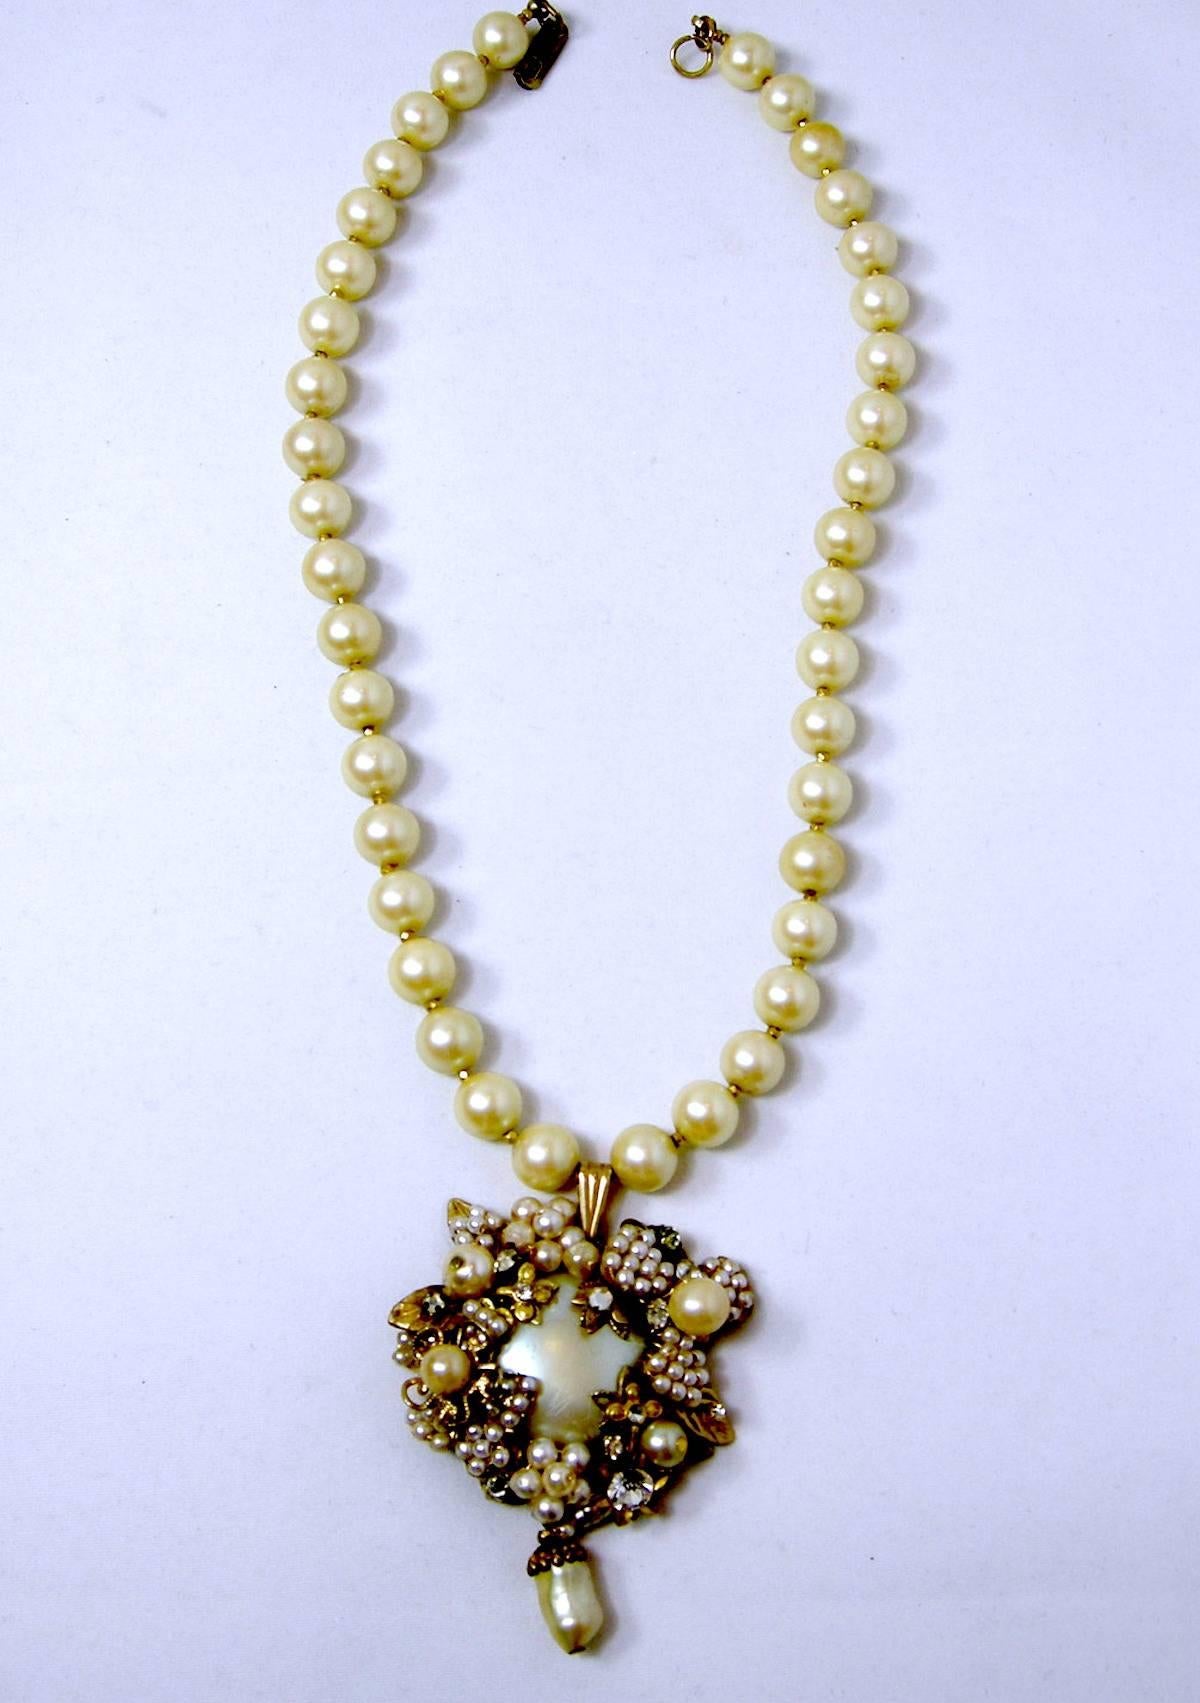 This vintage Miriam Haskell single strand necklace has beautiful cream-colored faux pearls with gold tone spacers in-between. It has a large sized faux pearl pendant. The long pearl pendant has multi-sized pearls with crystals accents and leaves. 